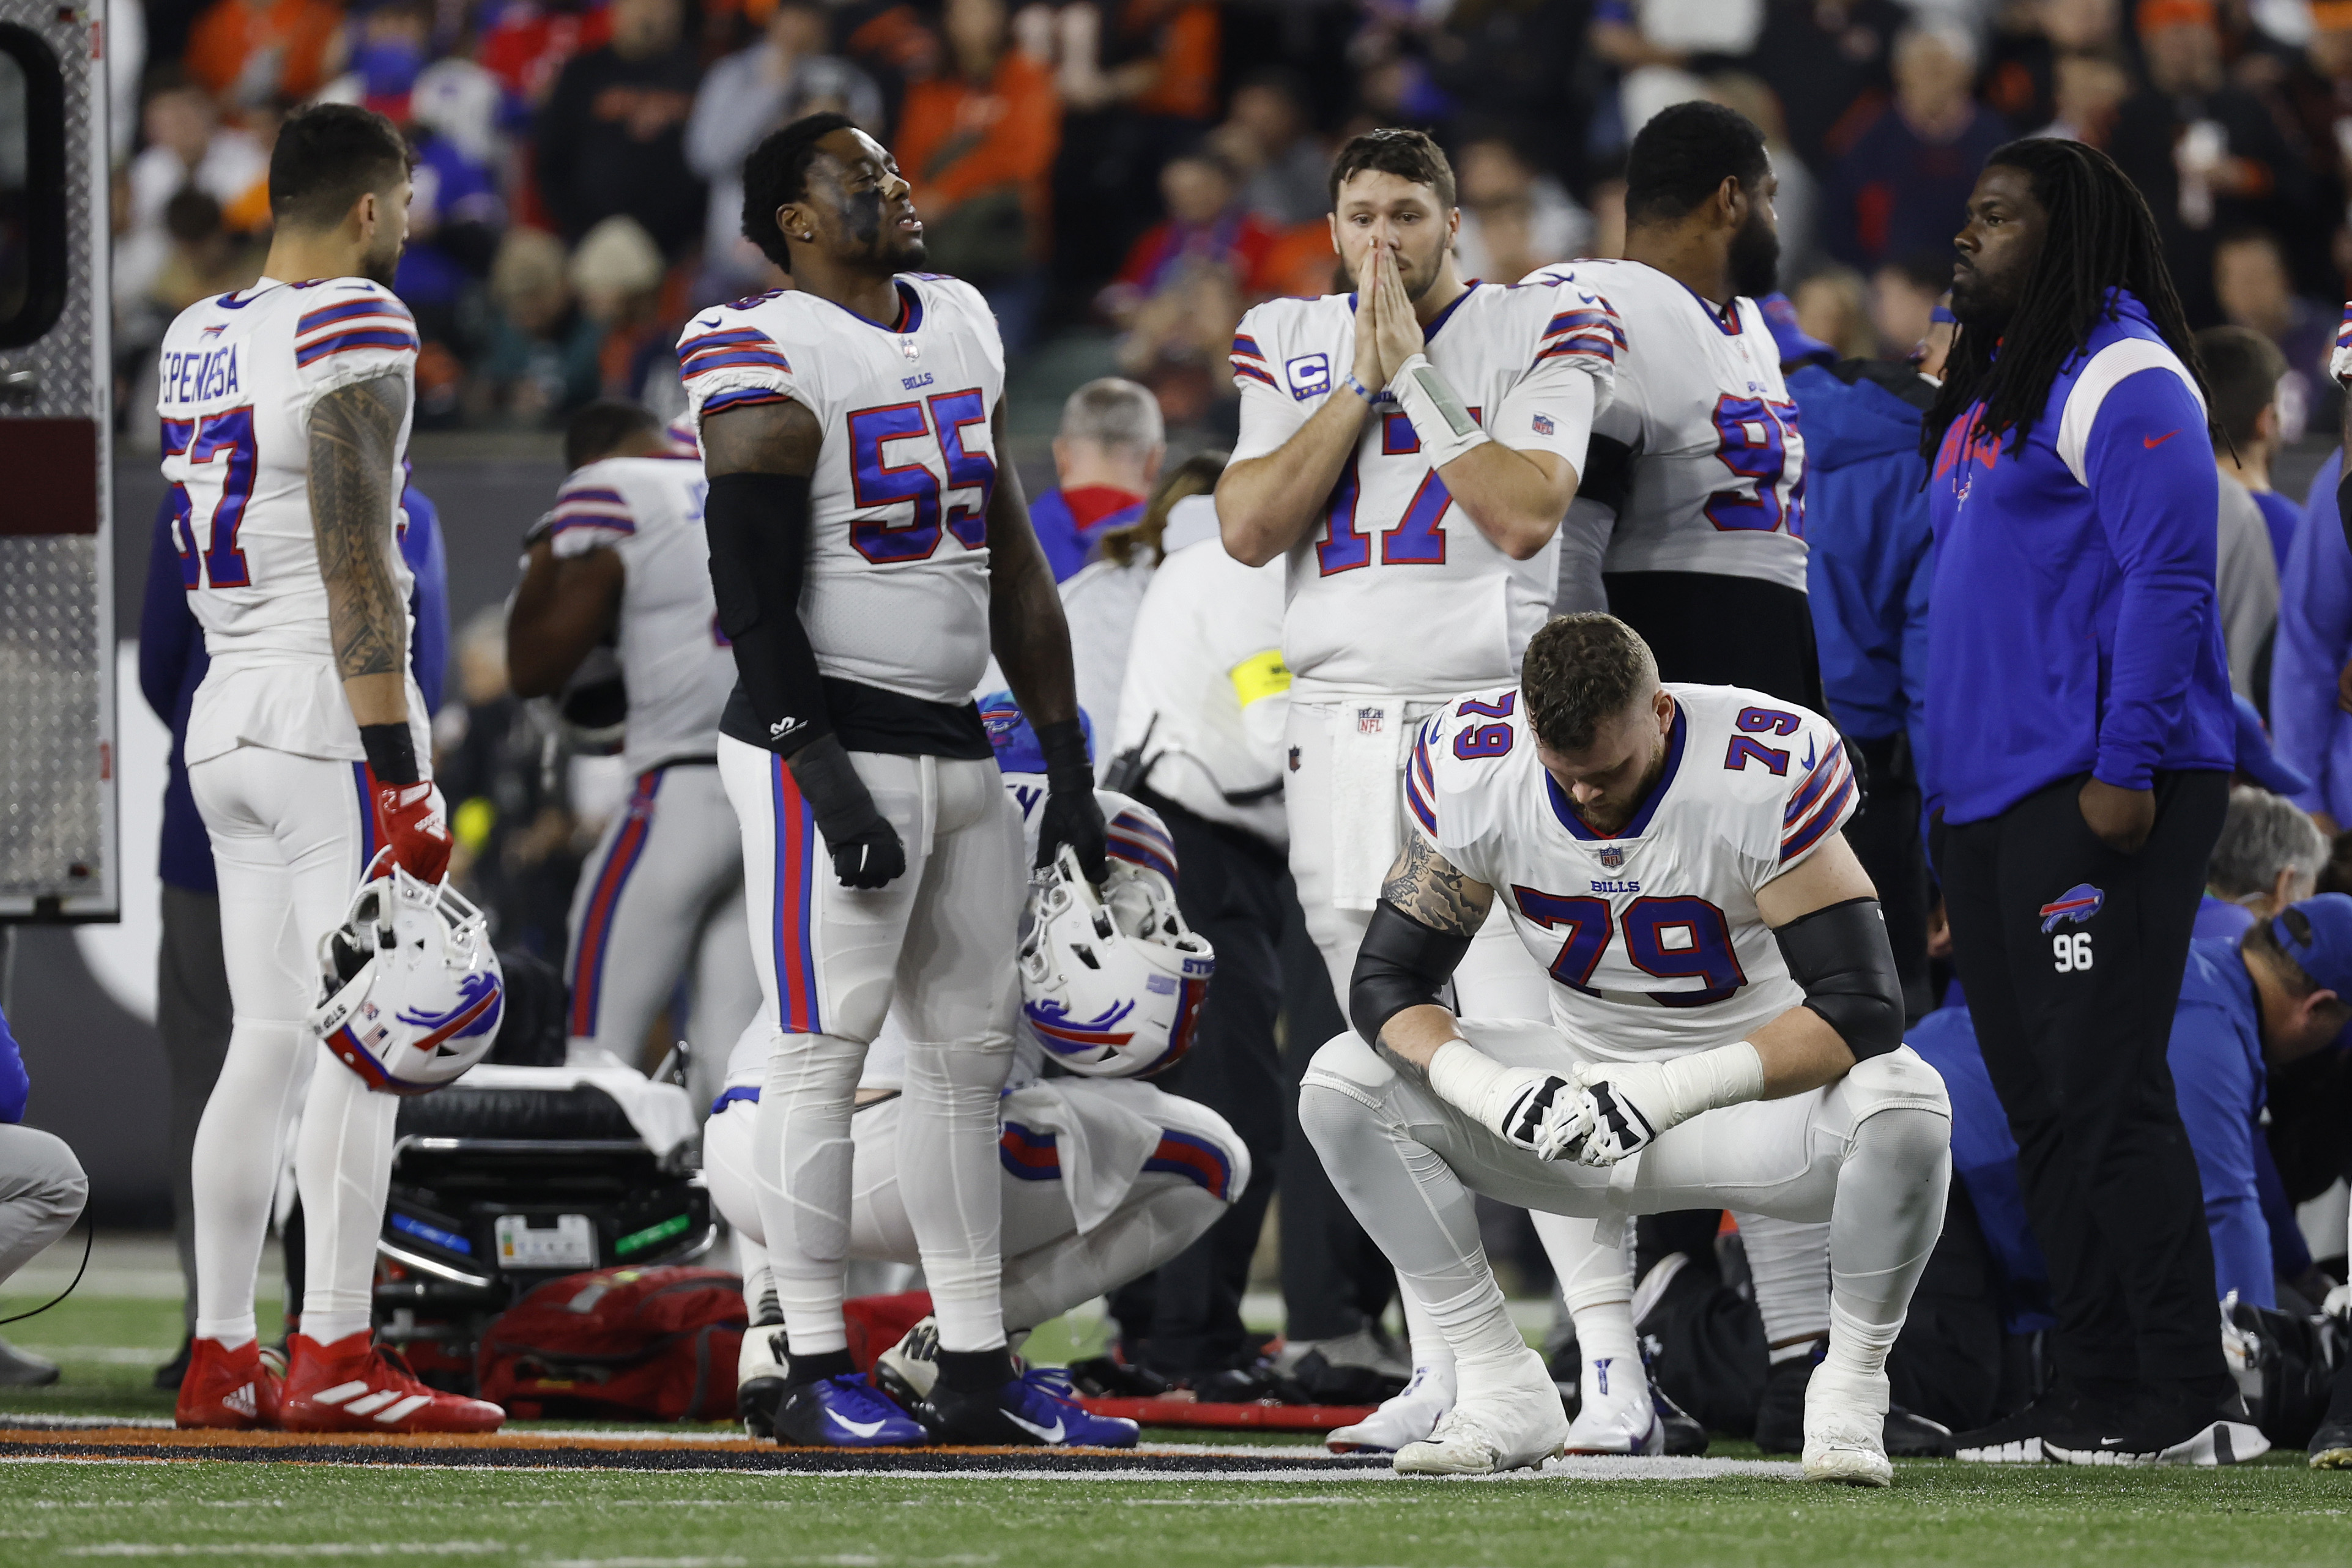 Buffalo Bills players react after teammate Damar Hamlin was injured during a game against the Bengals at Paycor Stadium on Monday in Cincinnati, Ohio.